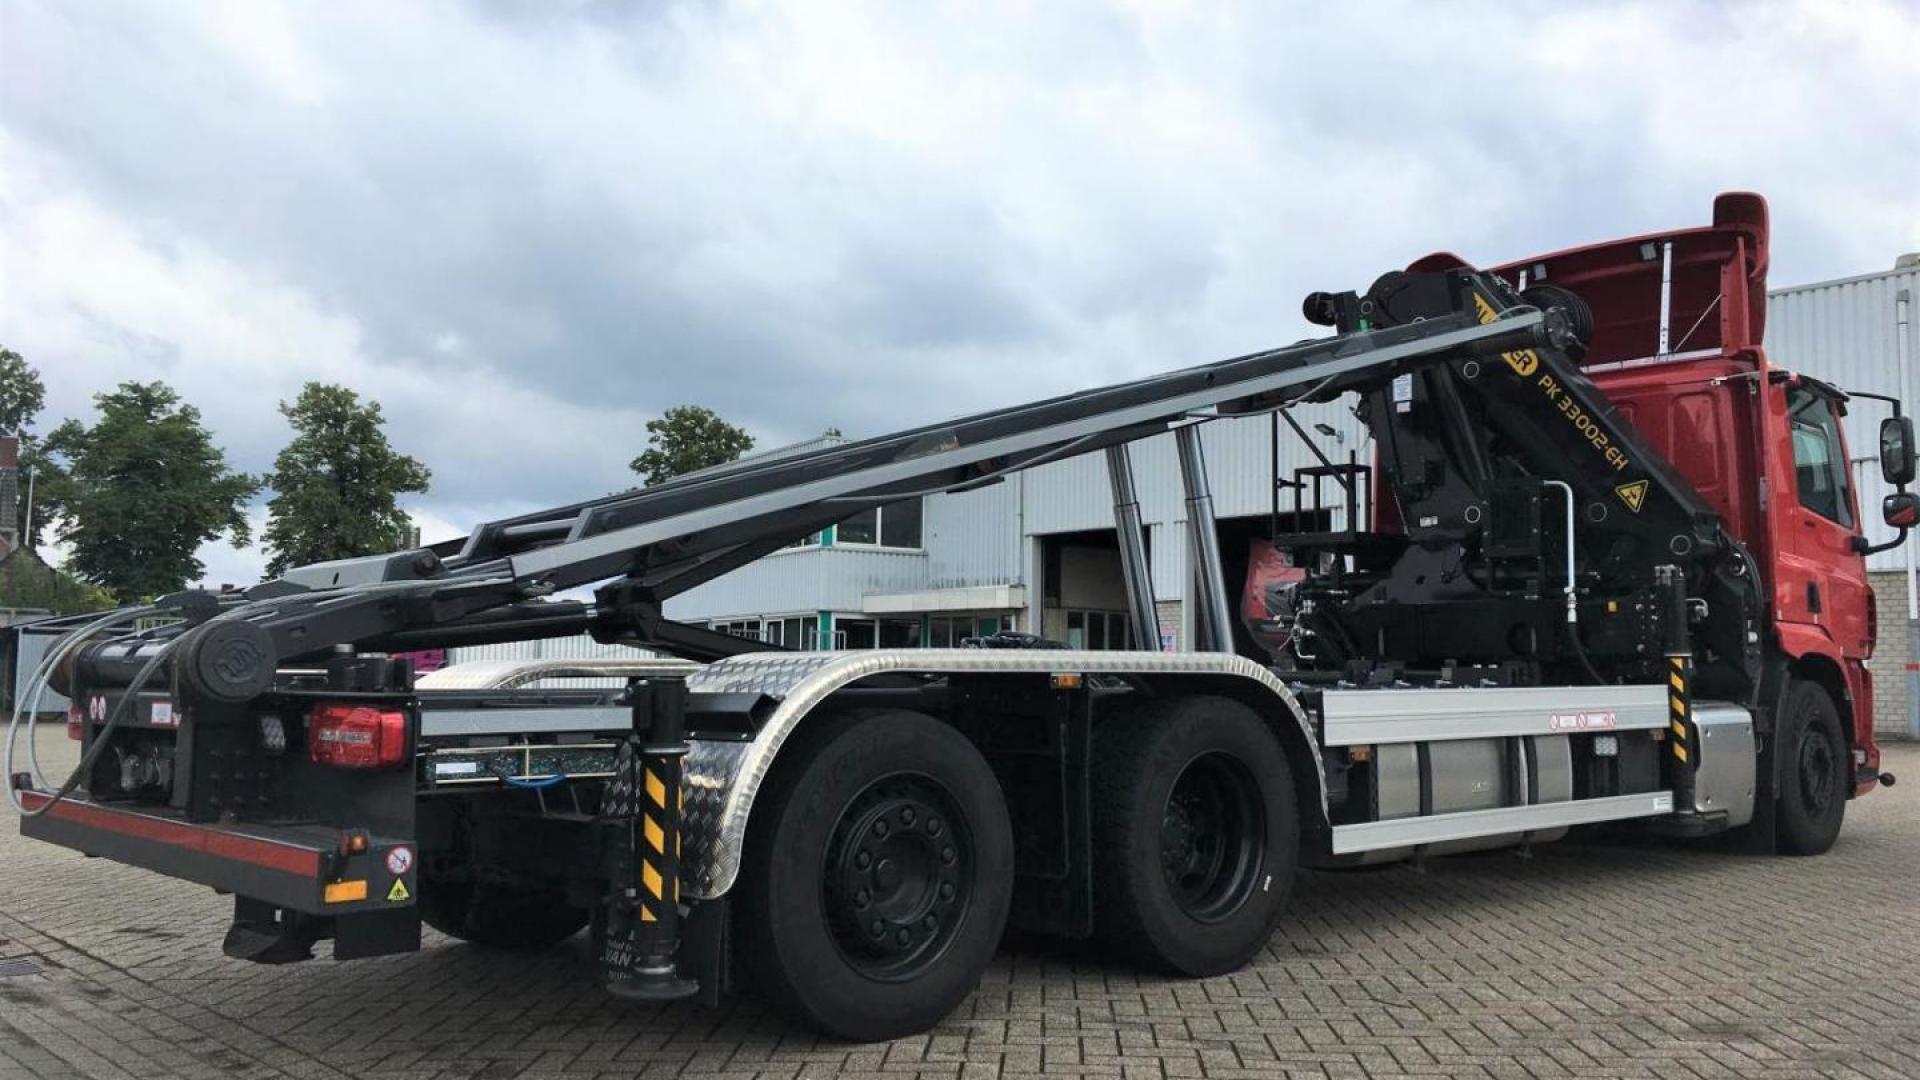 Terberg Techniek from Baarlo supplies VDL cablesystem to Limado Autobanden Service.